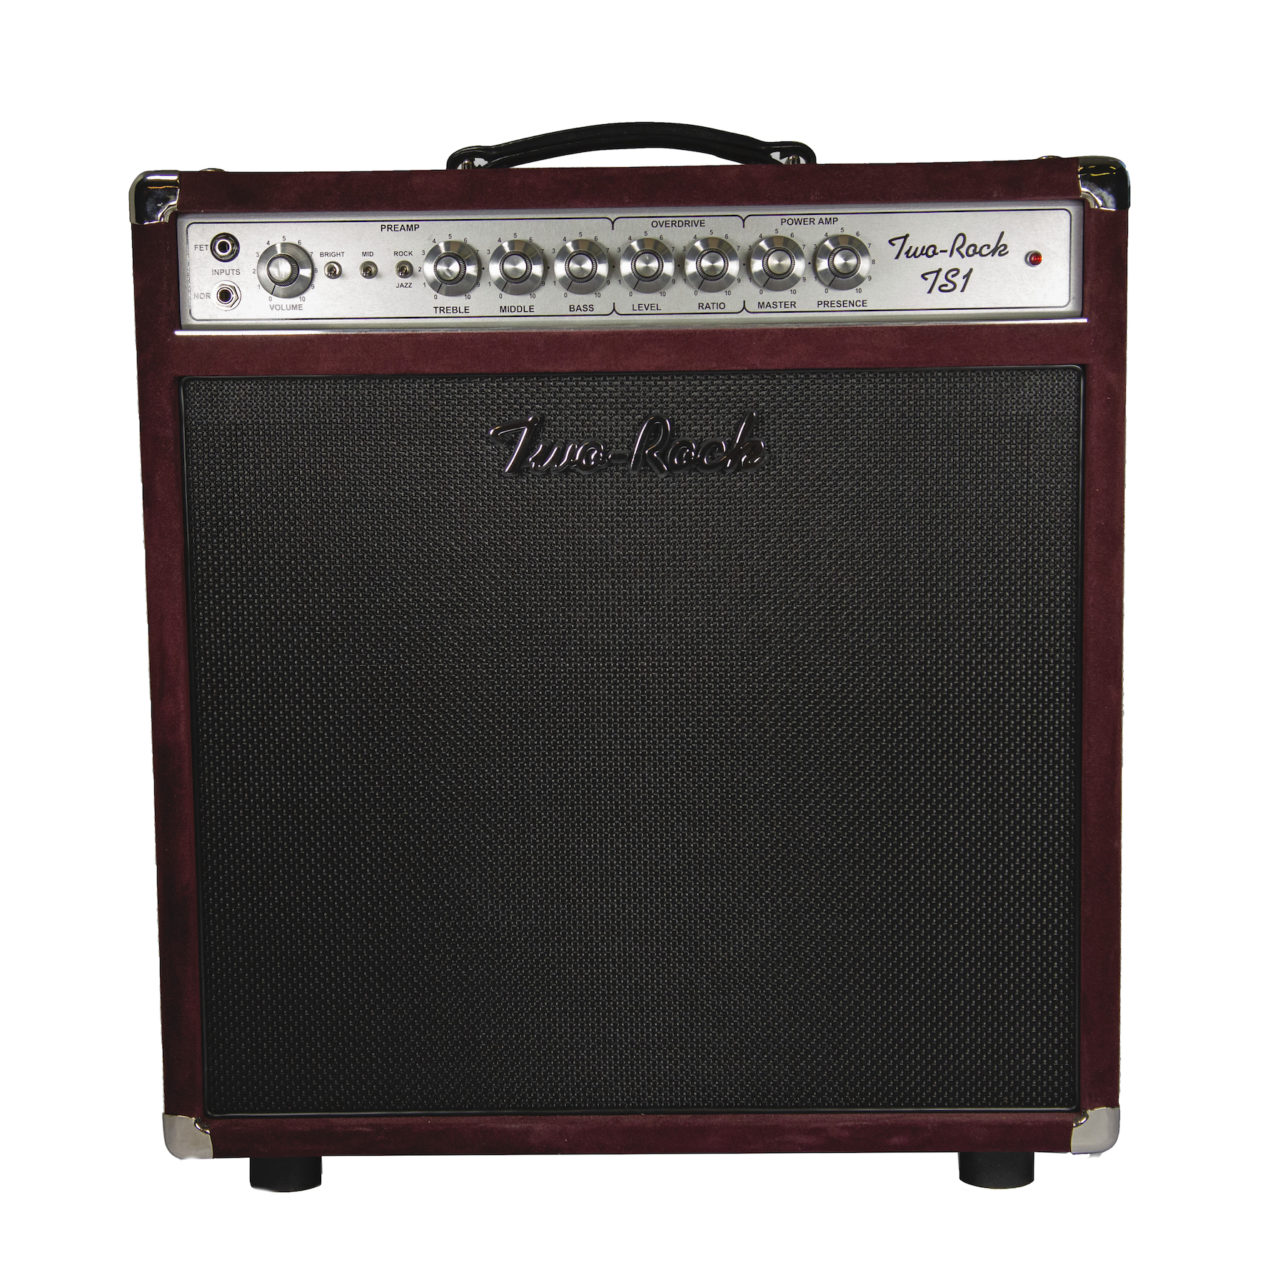 2019 TWO-ROCK TS-1 – 50 Watt Combo Silver Anodize Chassis Burgundy Suede